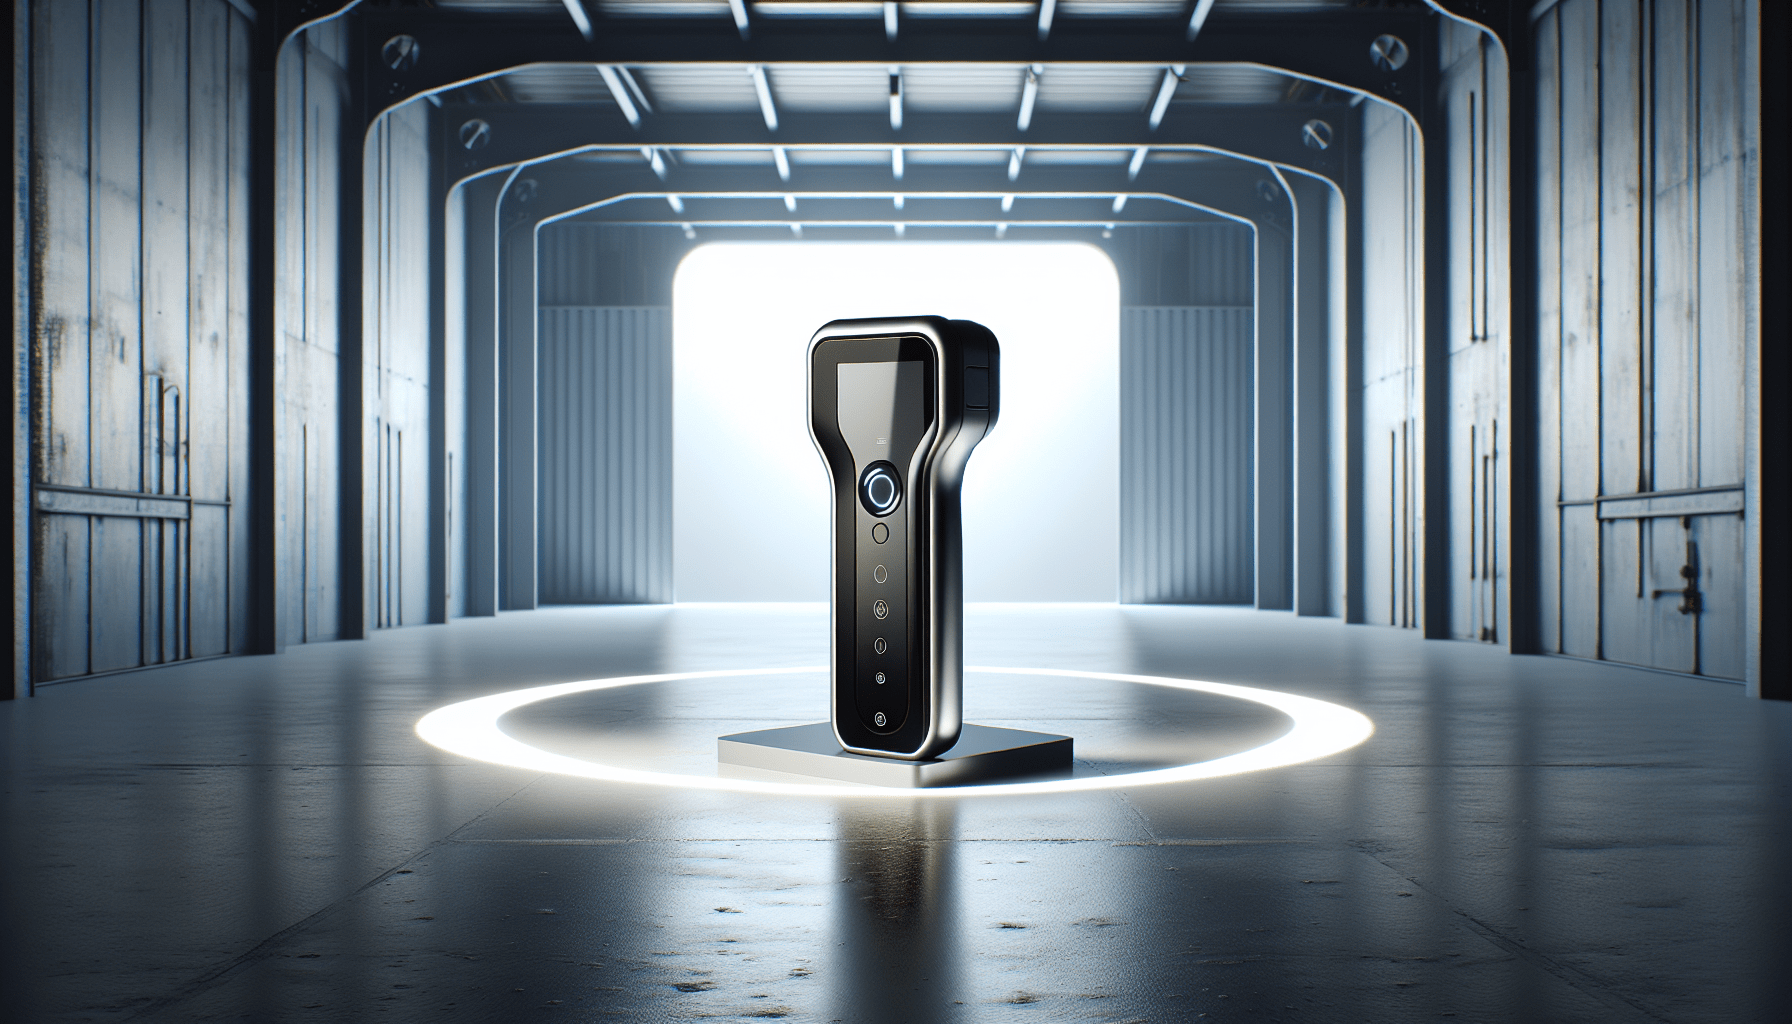 Hexagon Releases Its Innovative Handheld 3D Scanners